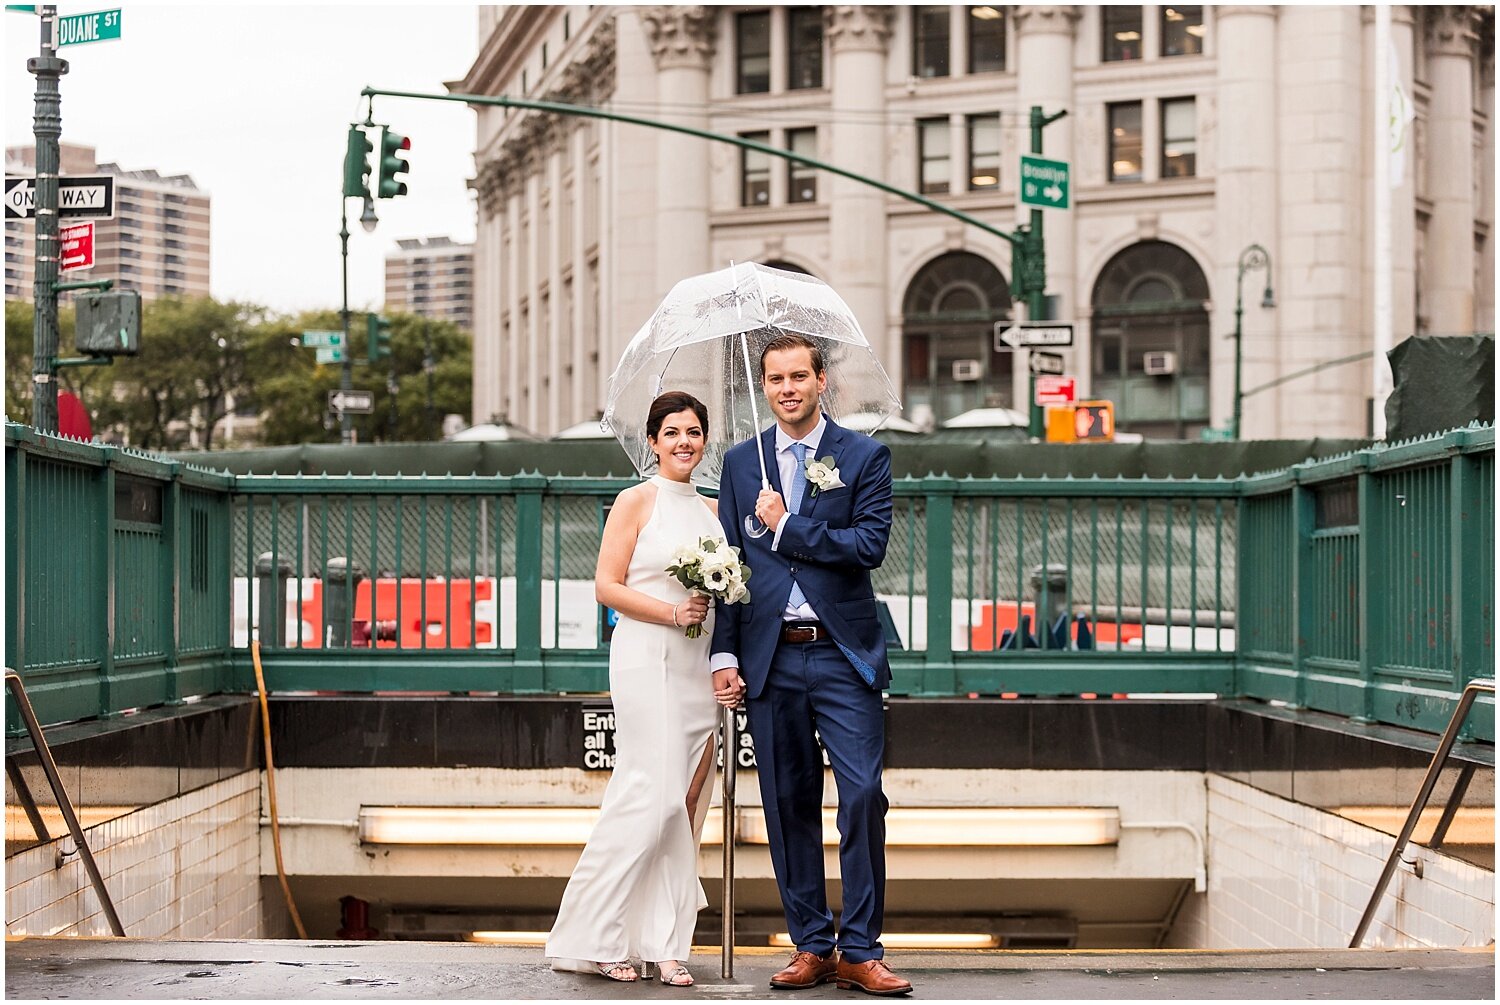 NYC-City-Hall-Courthouse-Elopement-Photographer-Apollo-Fields-026.jpg